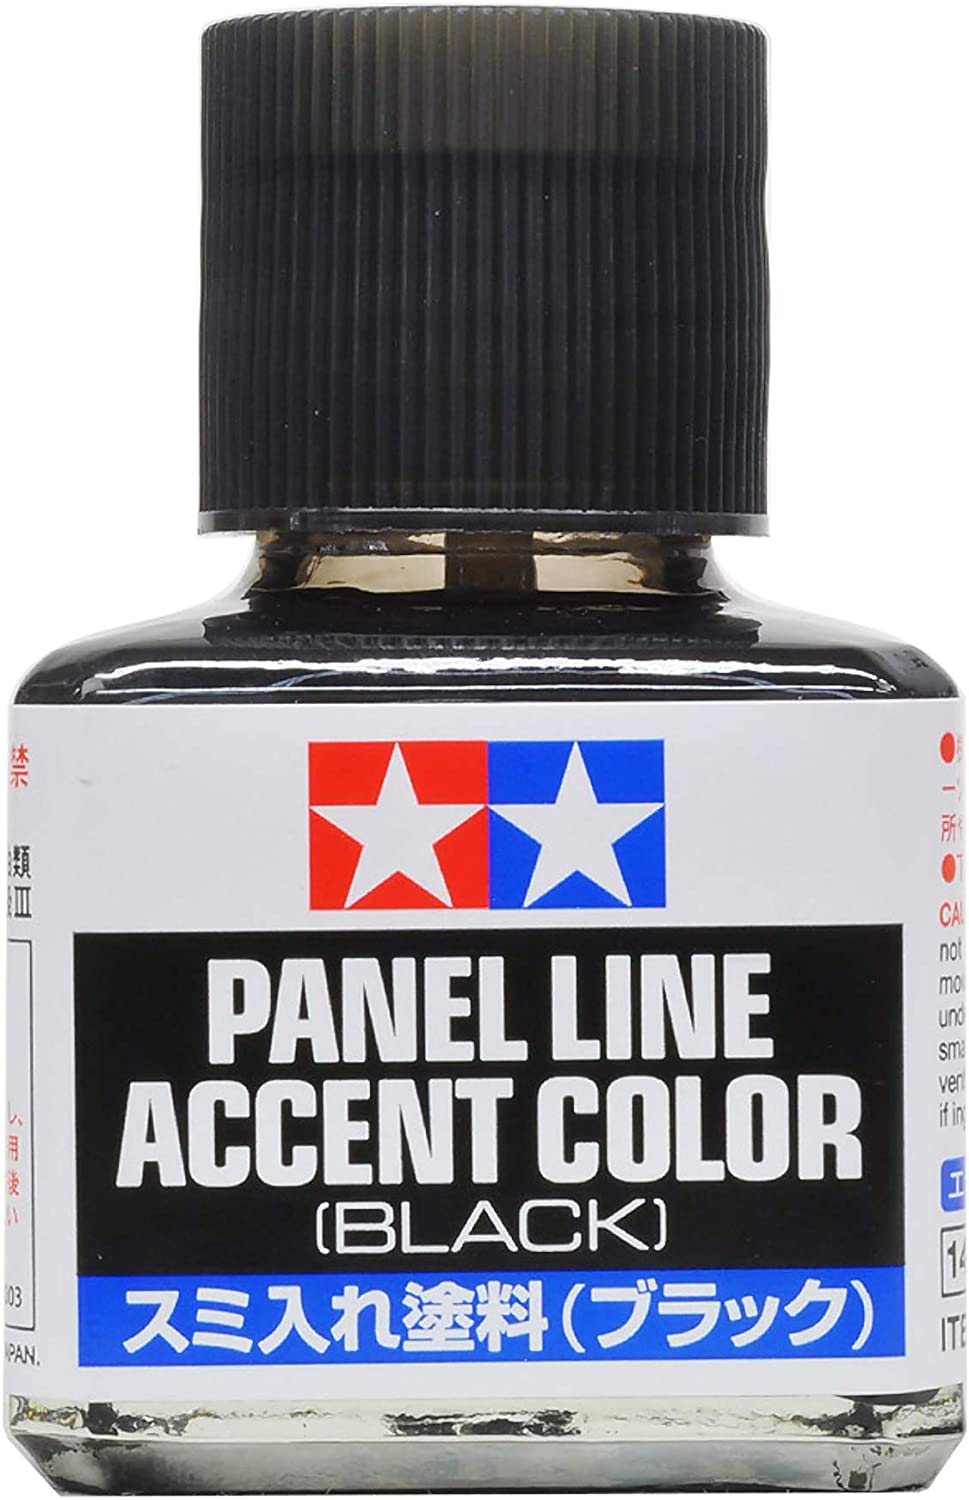 Tamiya Black Panel Line Accent Color 40ml - Bards & Cards